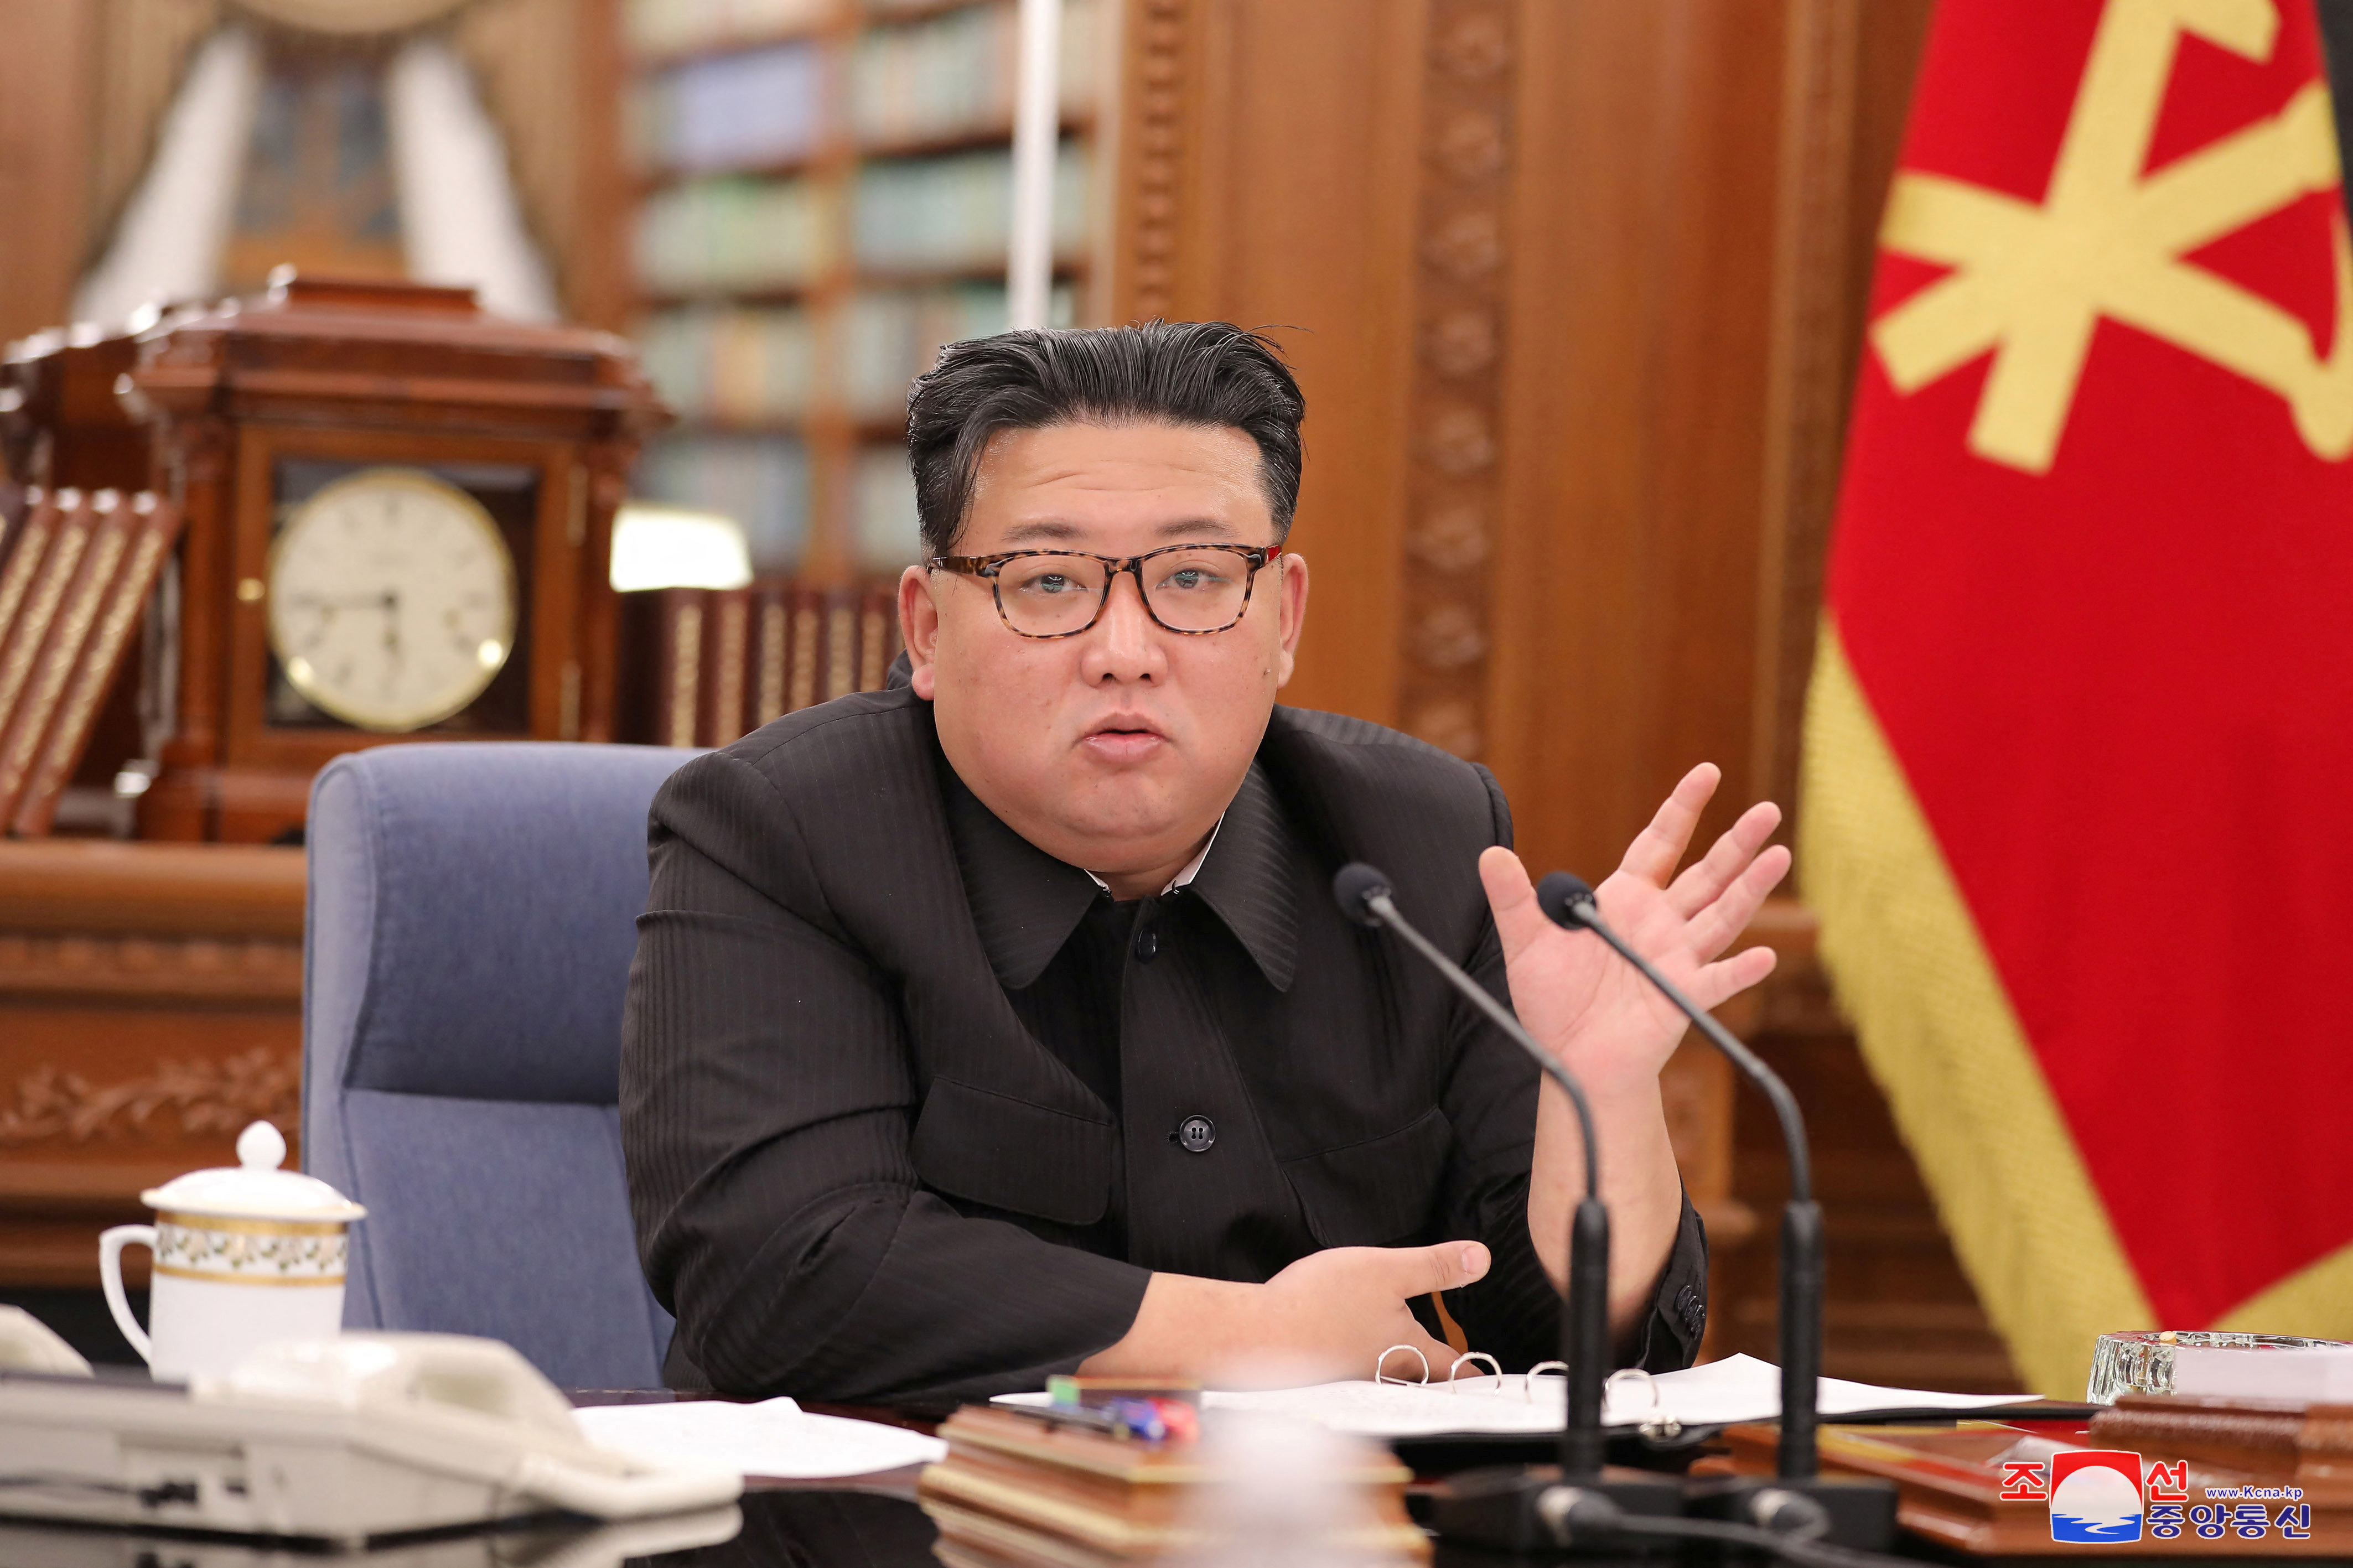 North Korean leader Kim Jong Un presides over the enlarged meeting of the Secretariat of the Central Committee of the Workers' Party of Korea in Pyongyang